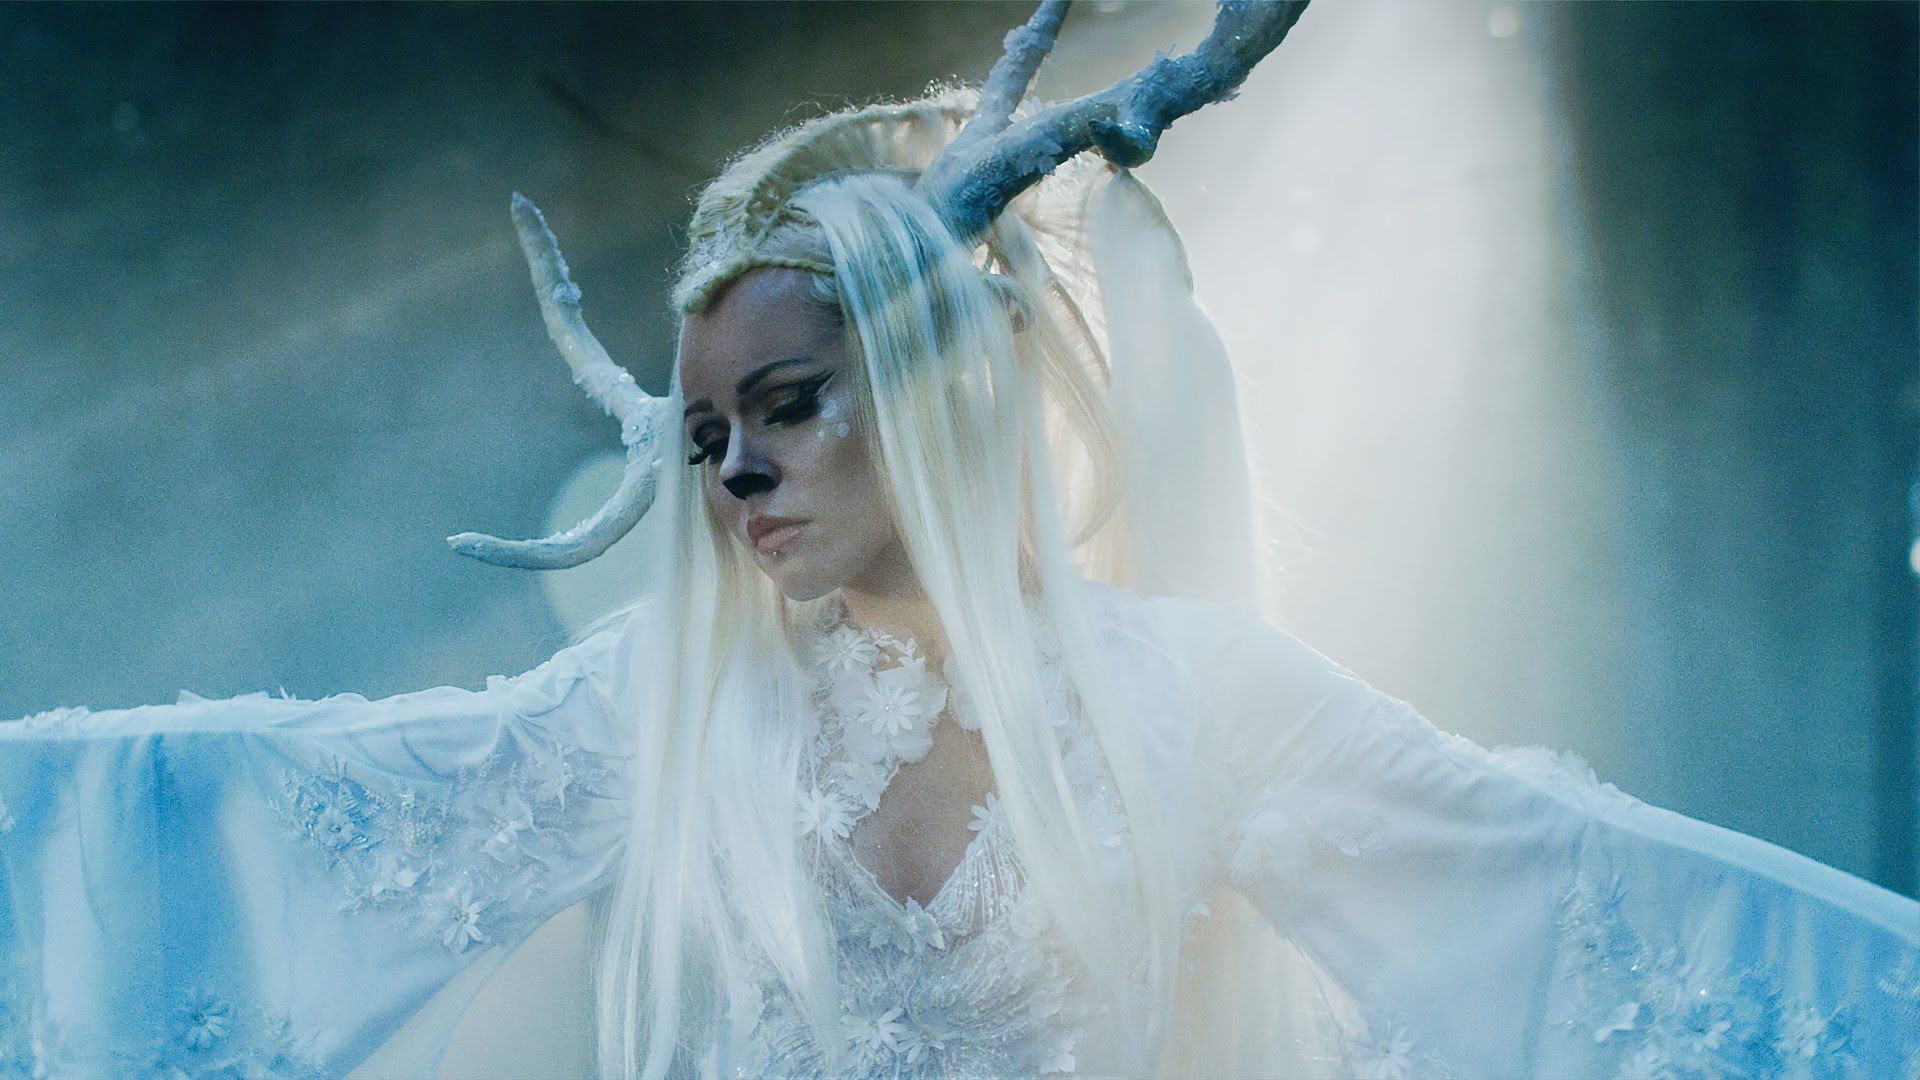  Kerli HQ Background Wallpapers